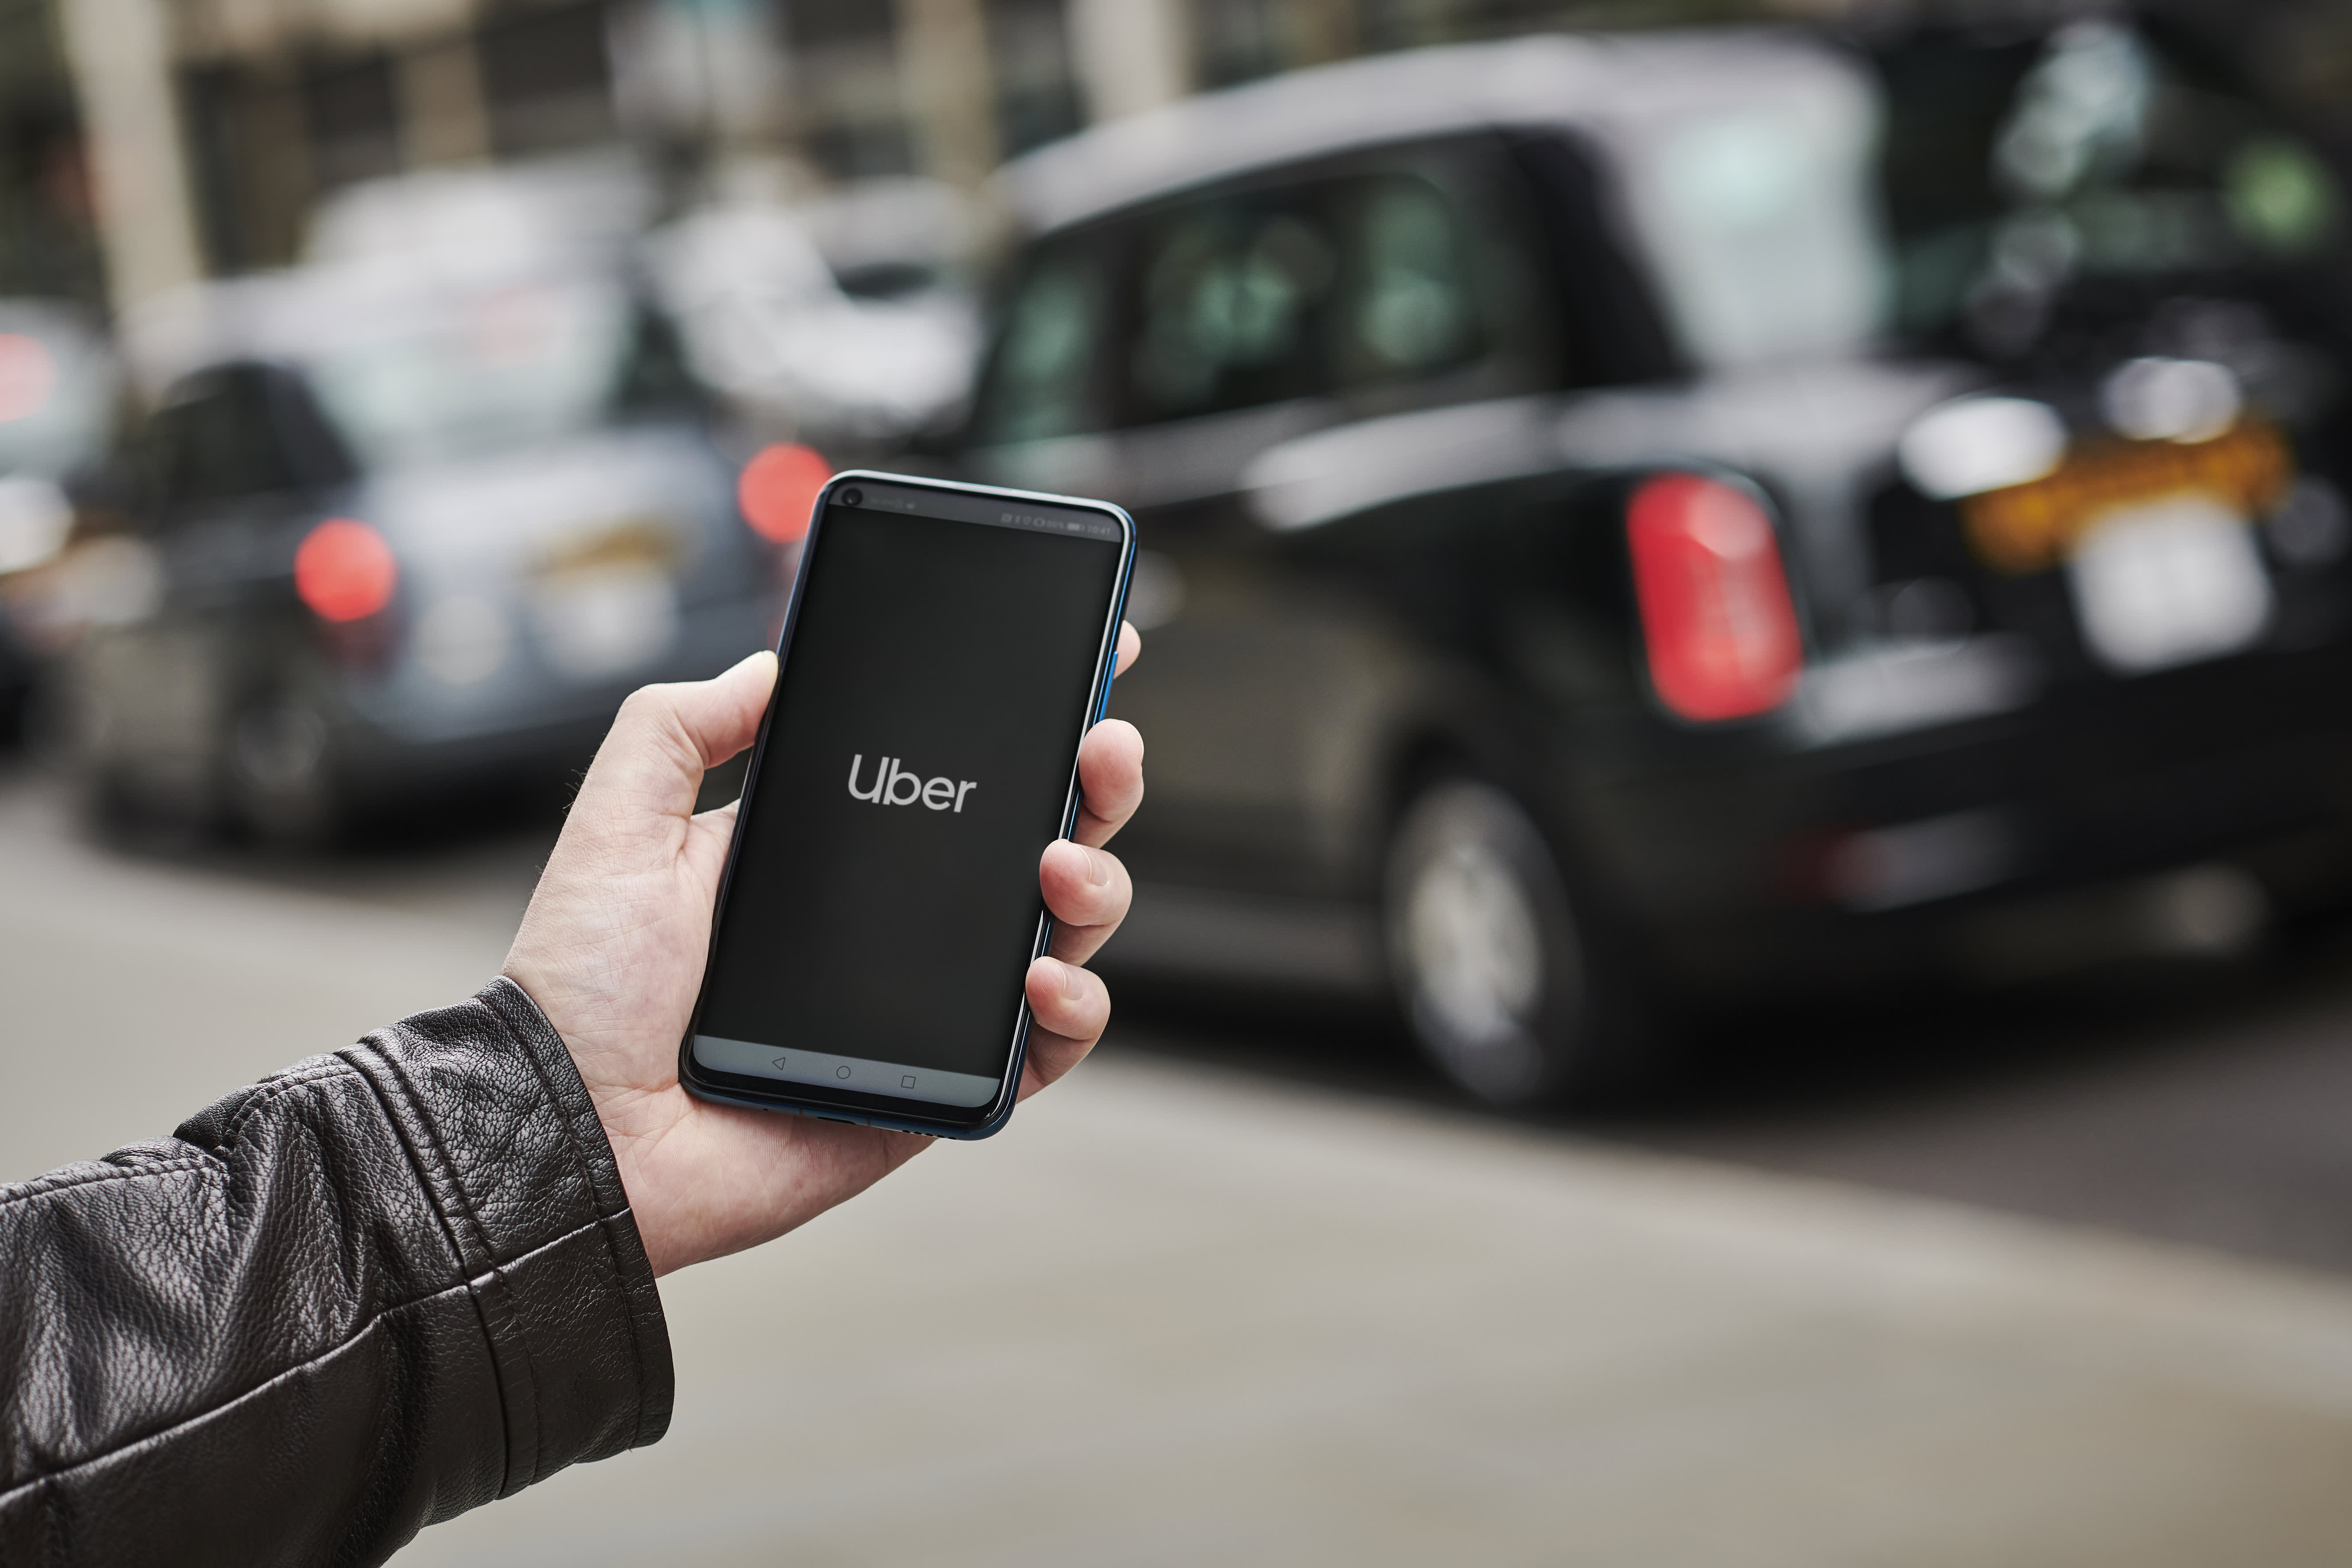 Uber rivals mobilize as the company's future in London becomes uncertain